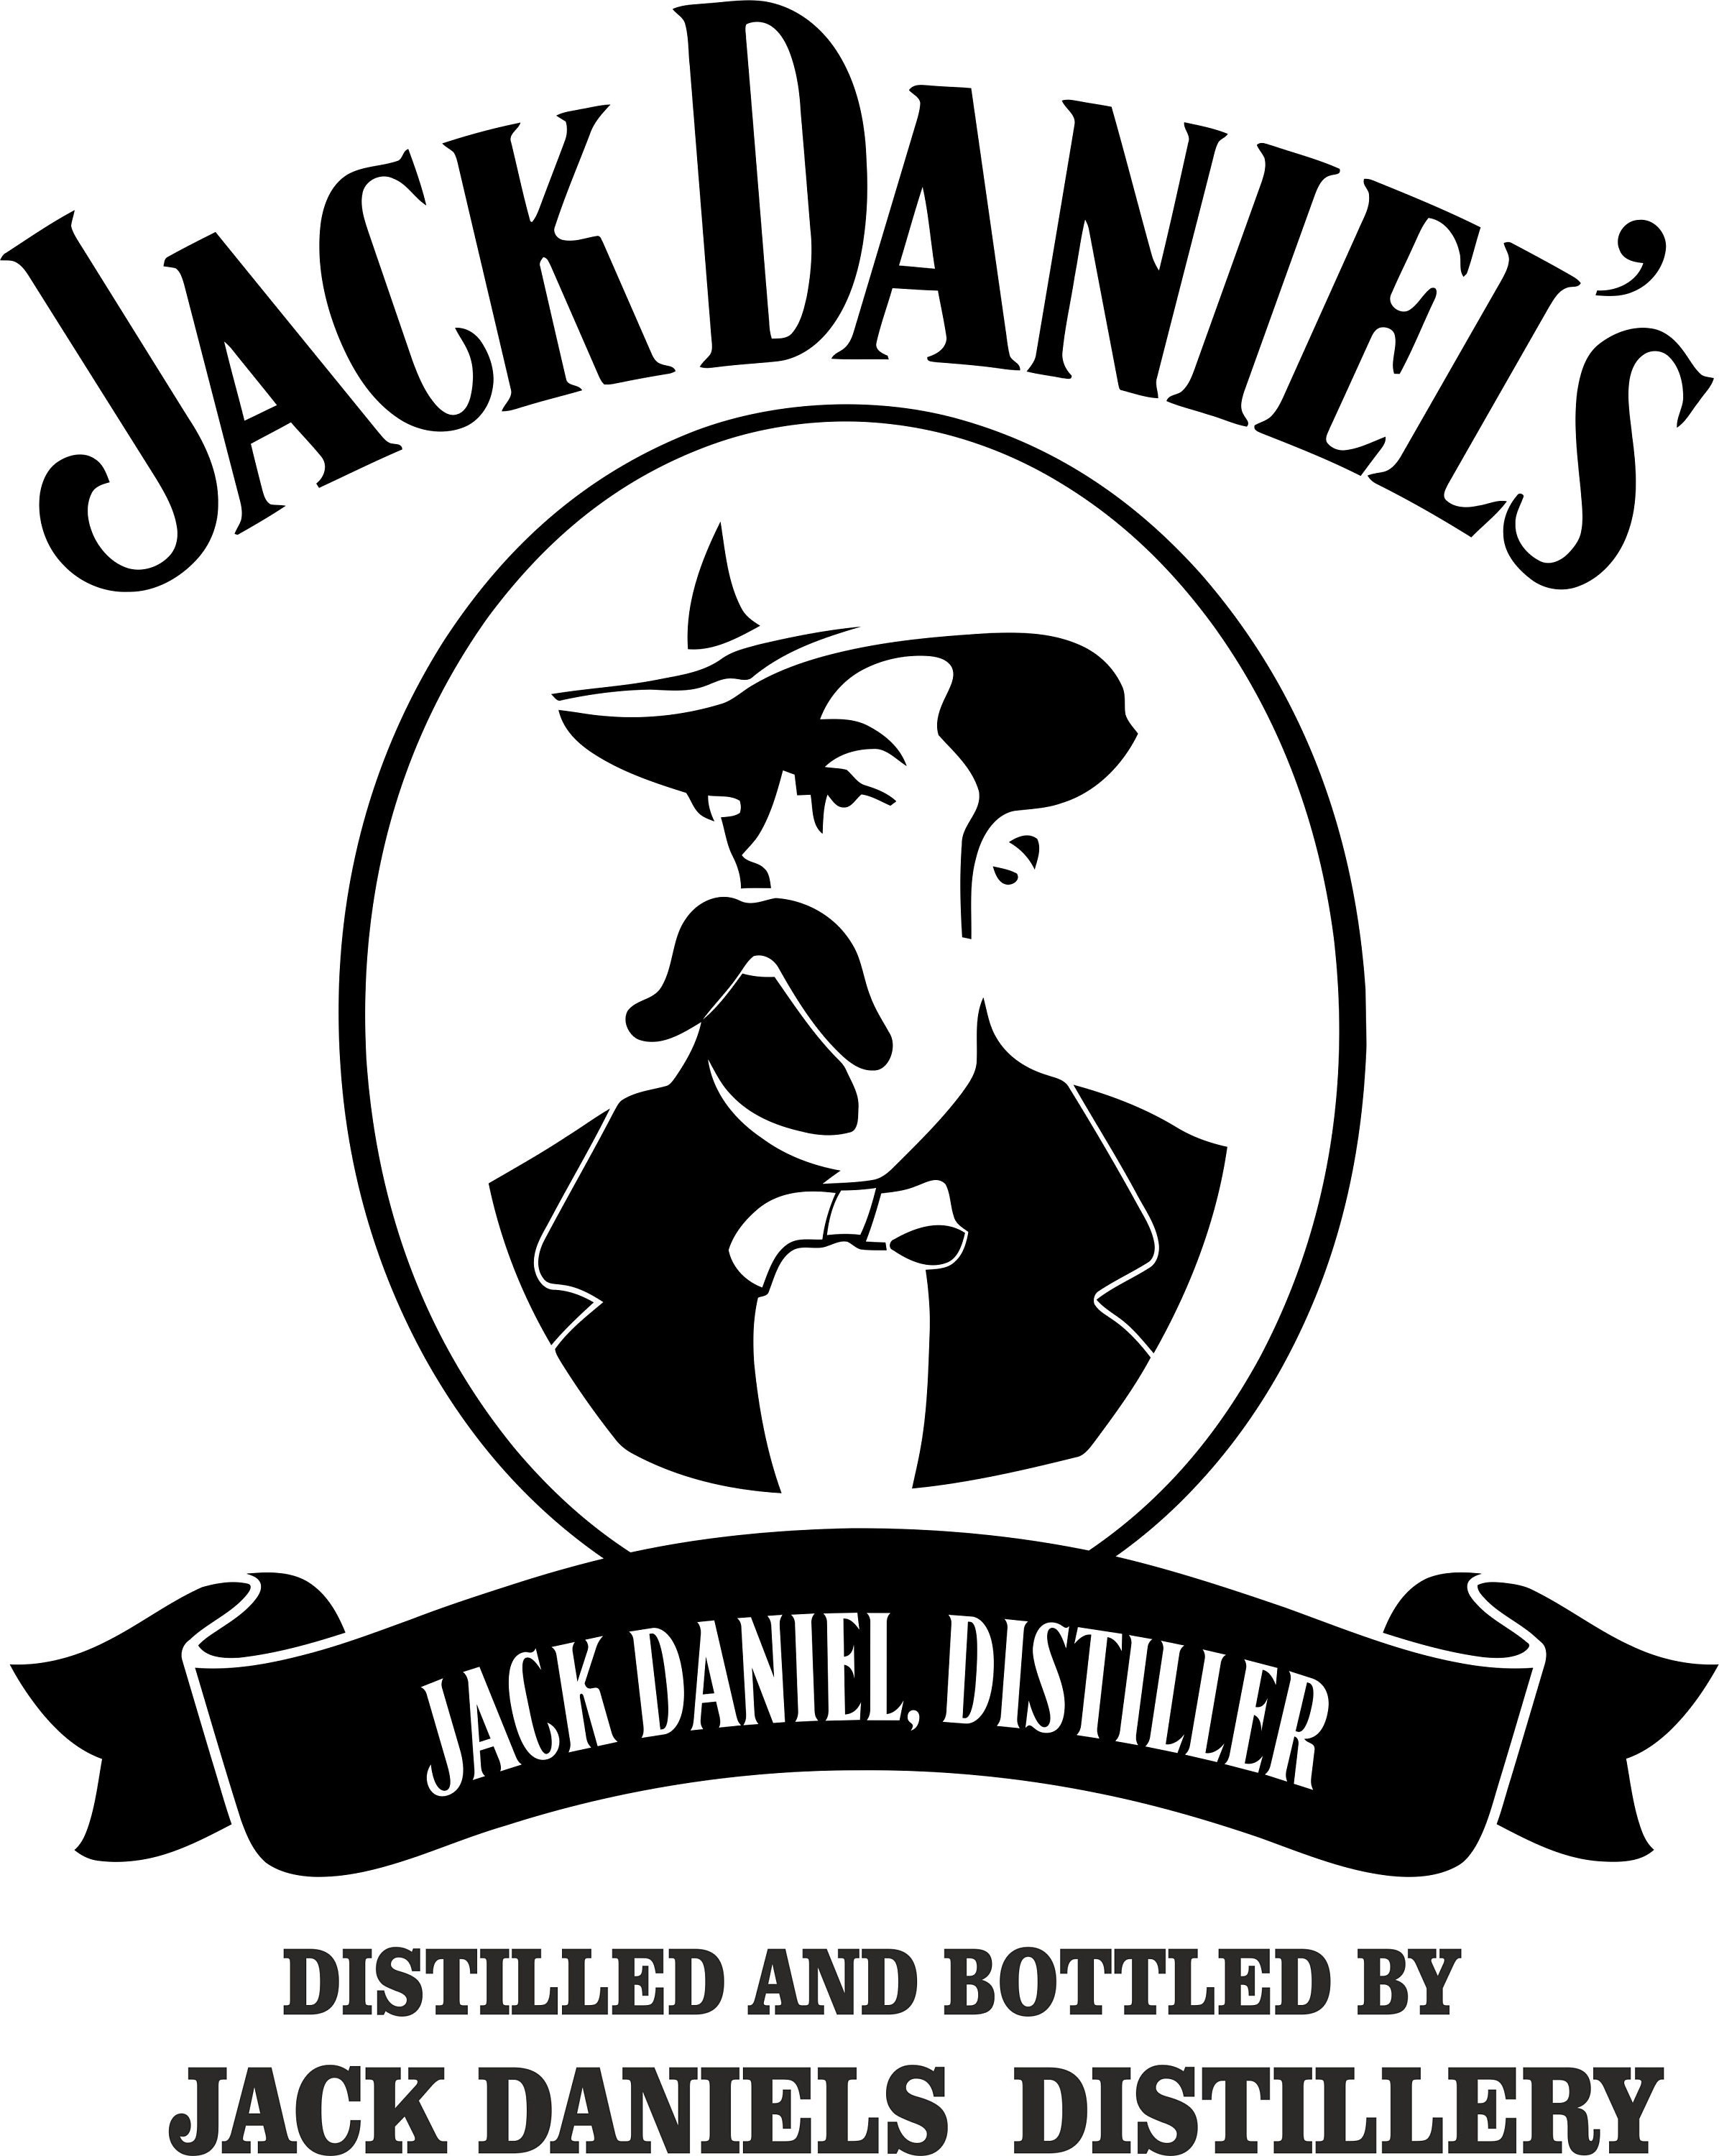 Passion Stickers - Drink Decals - Jack Daniel's Whiskey Logo Decals Alcohol